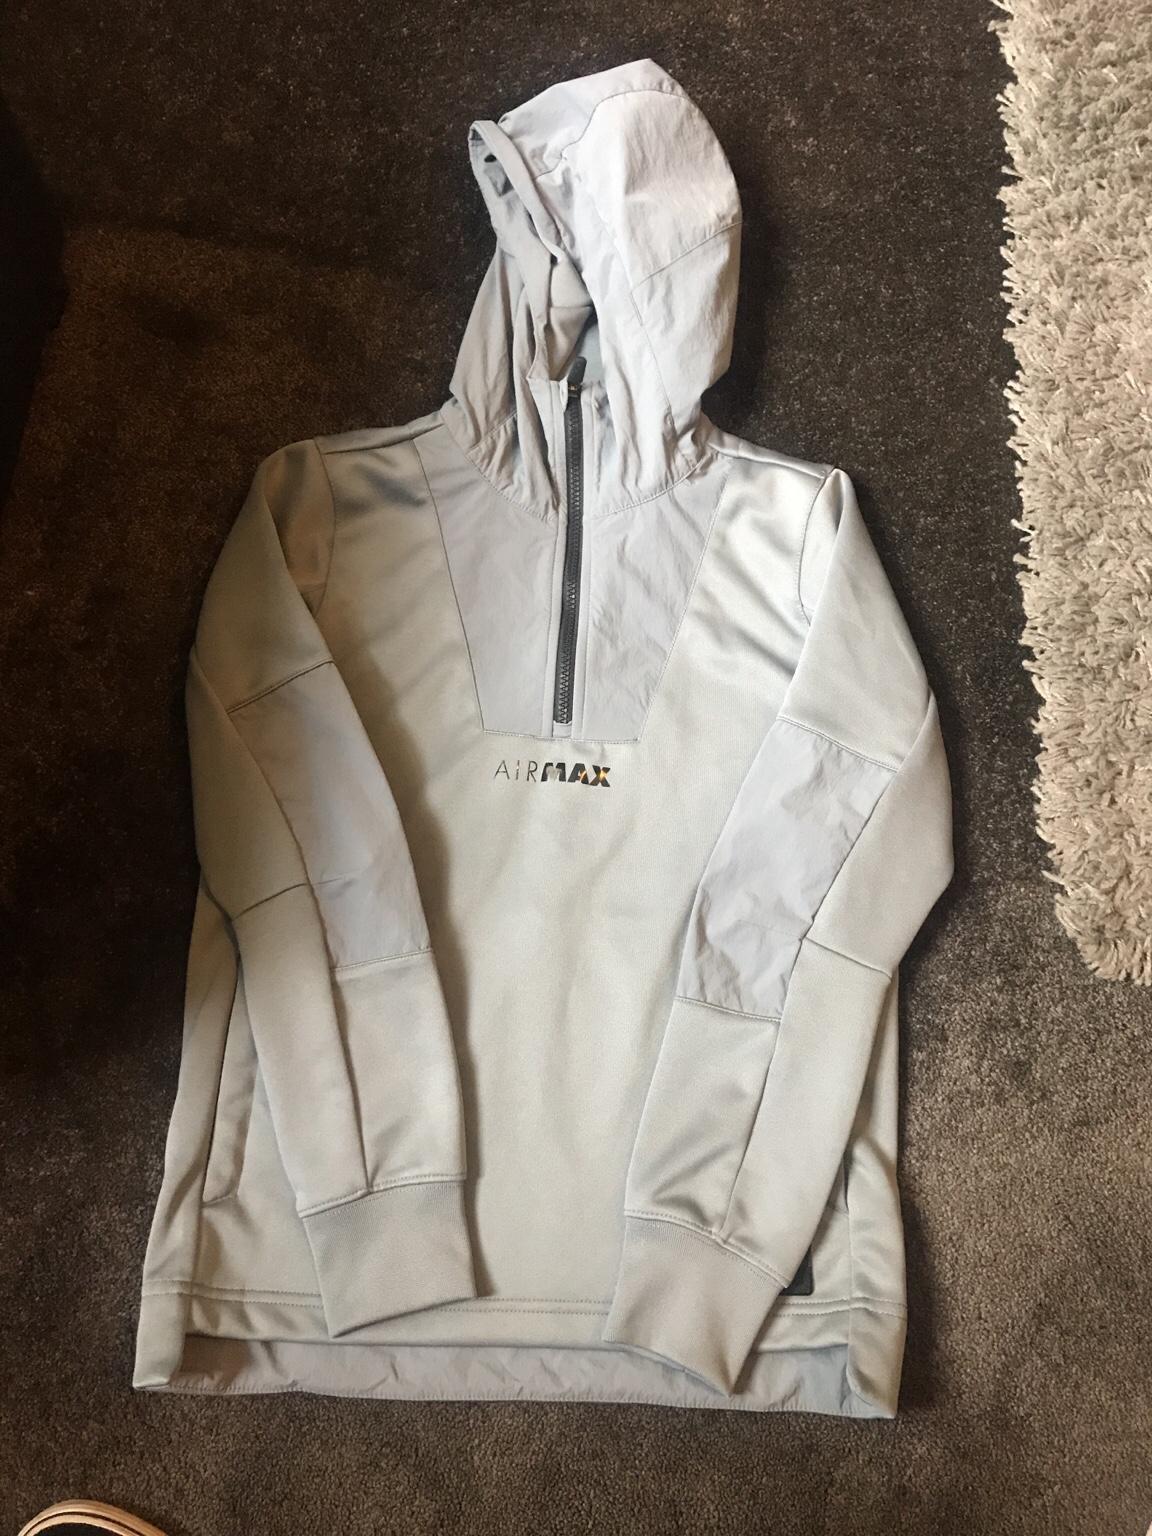 Nike air max tracksuit jacket in CH44 Wirral for £5.00 for sale | Shpock